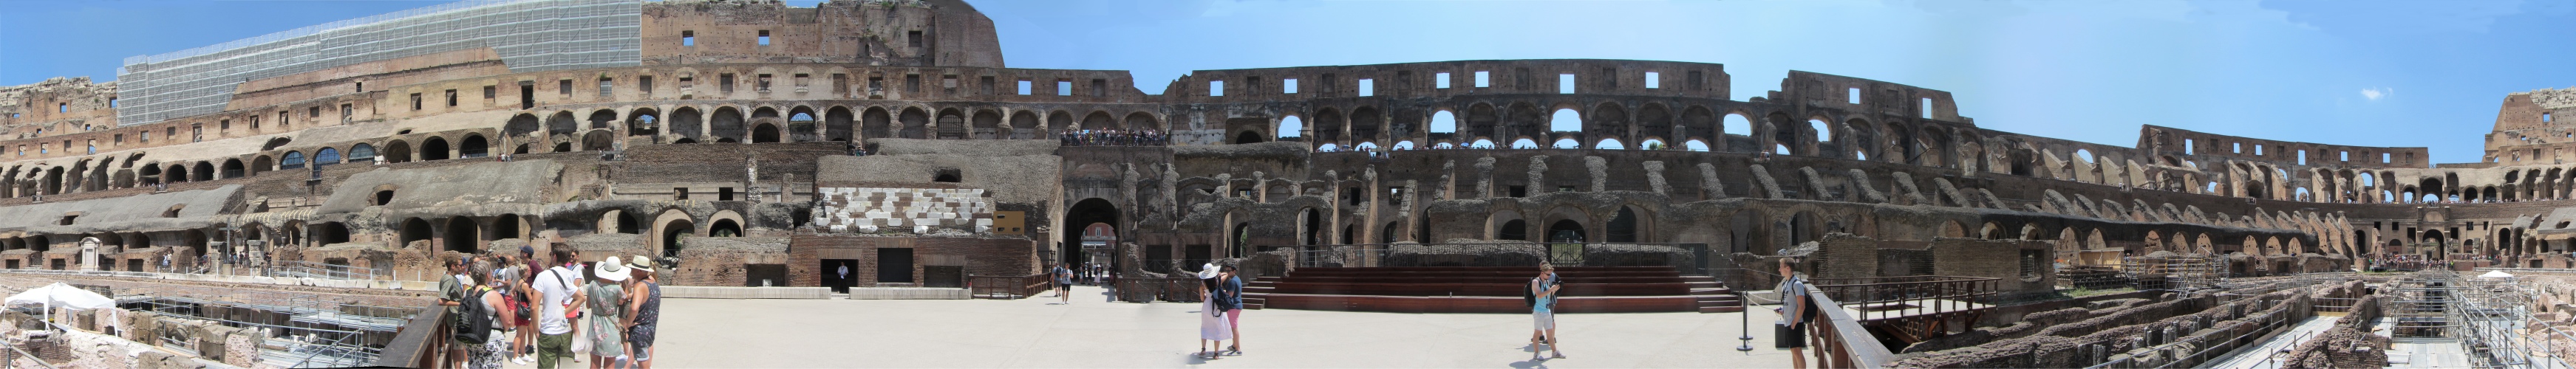 colosseum_from_arena